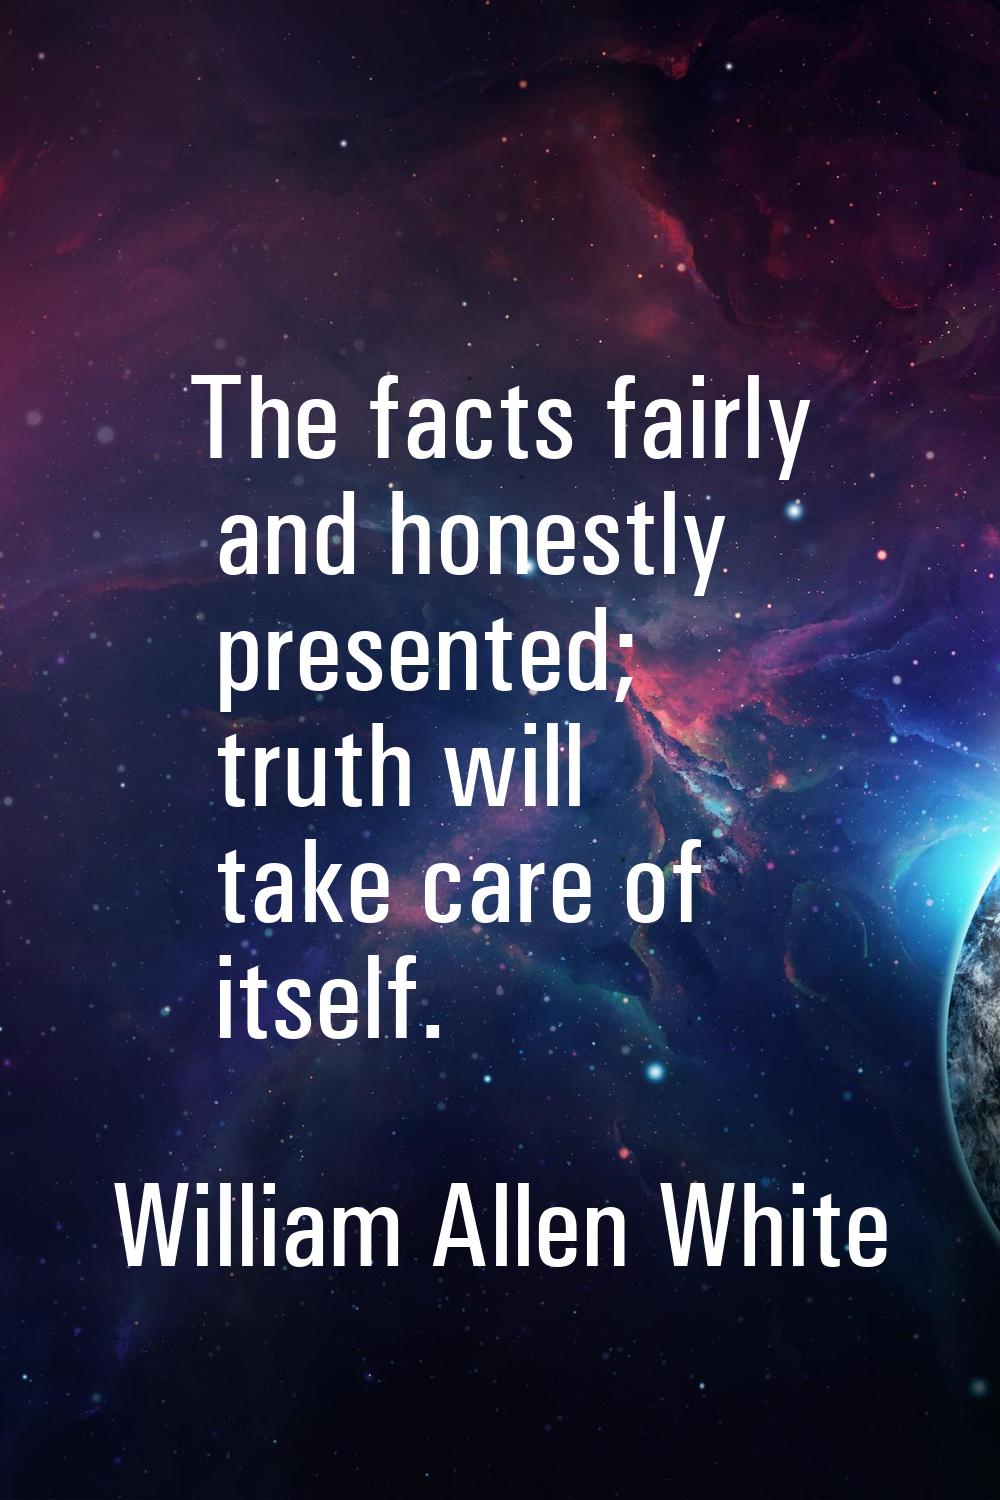 The facts fairly and honestly presented; truth will take care of itself.